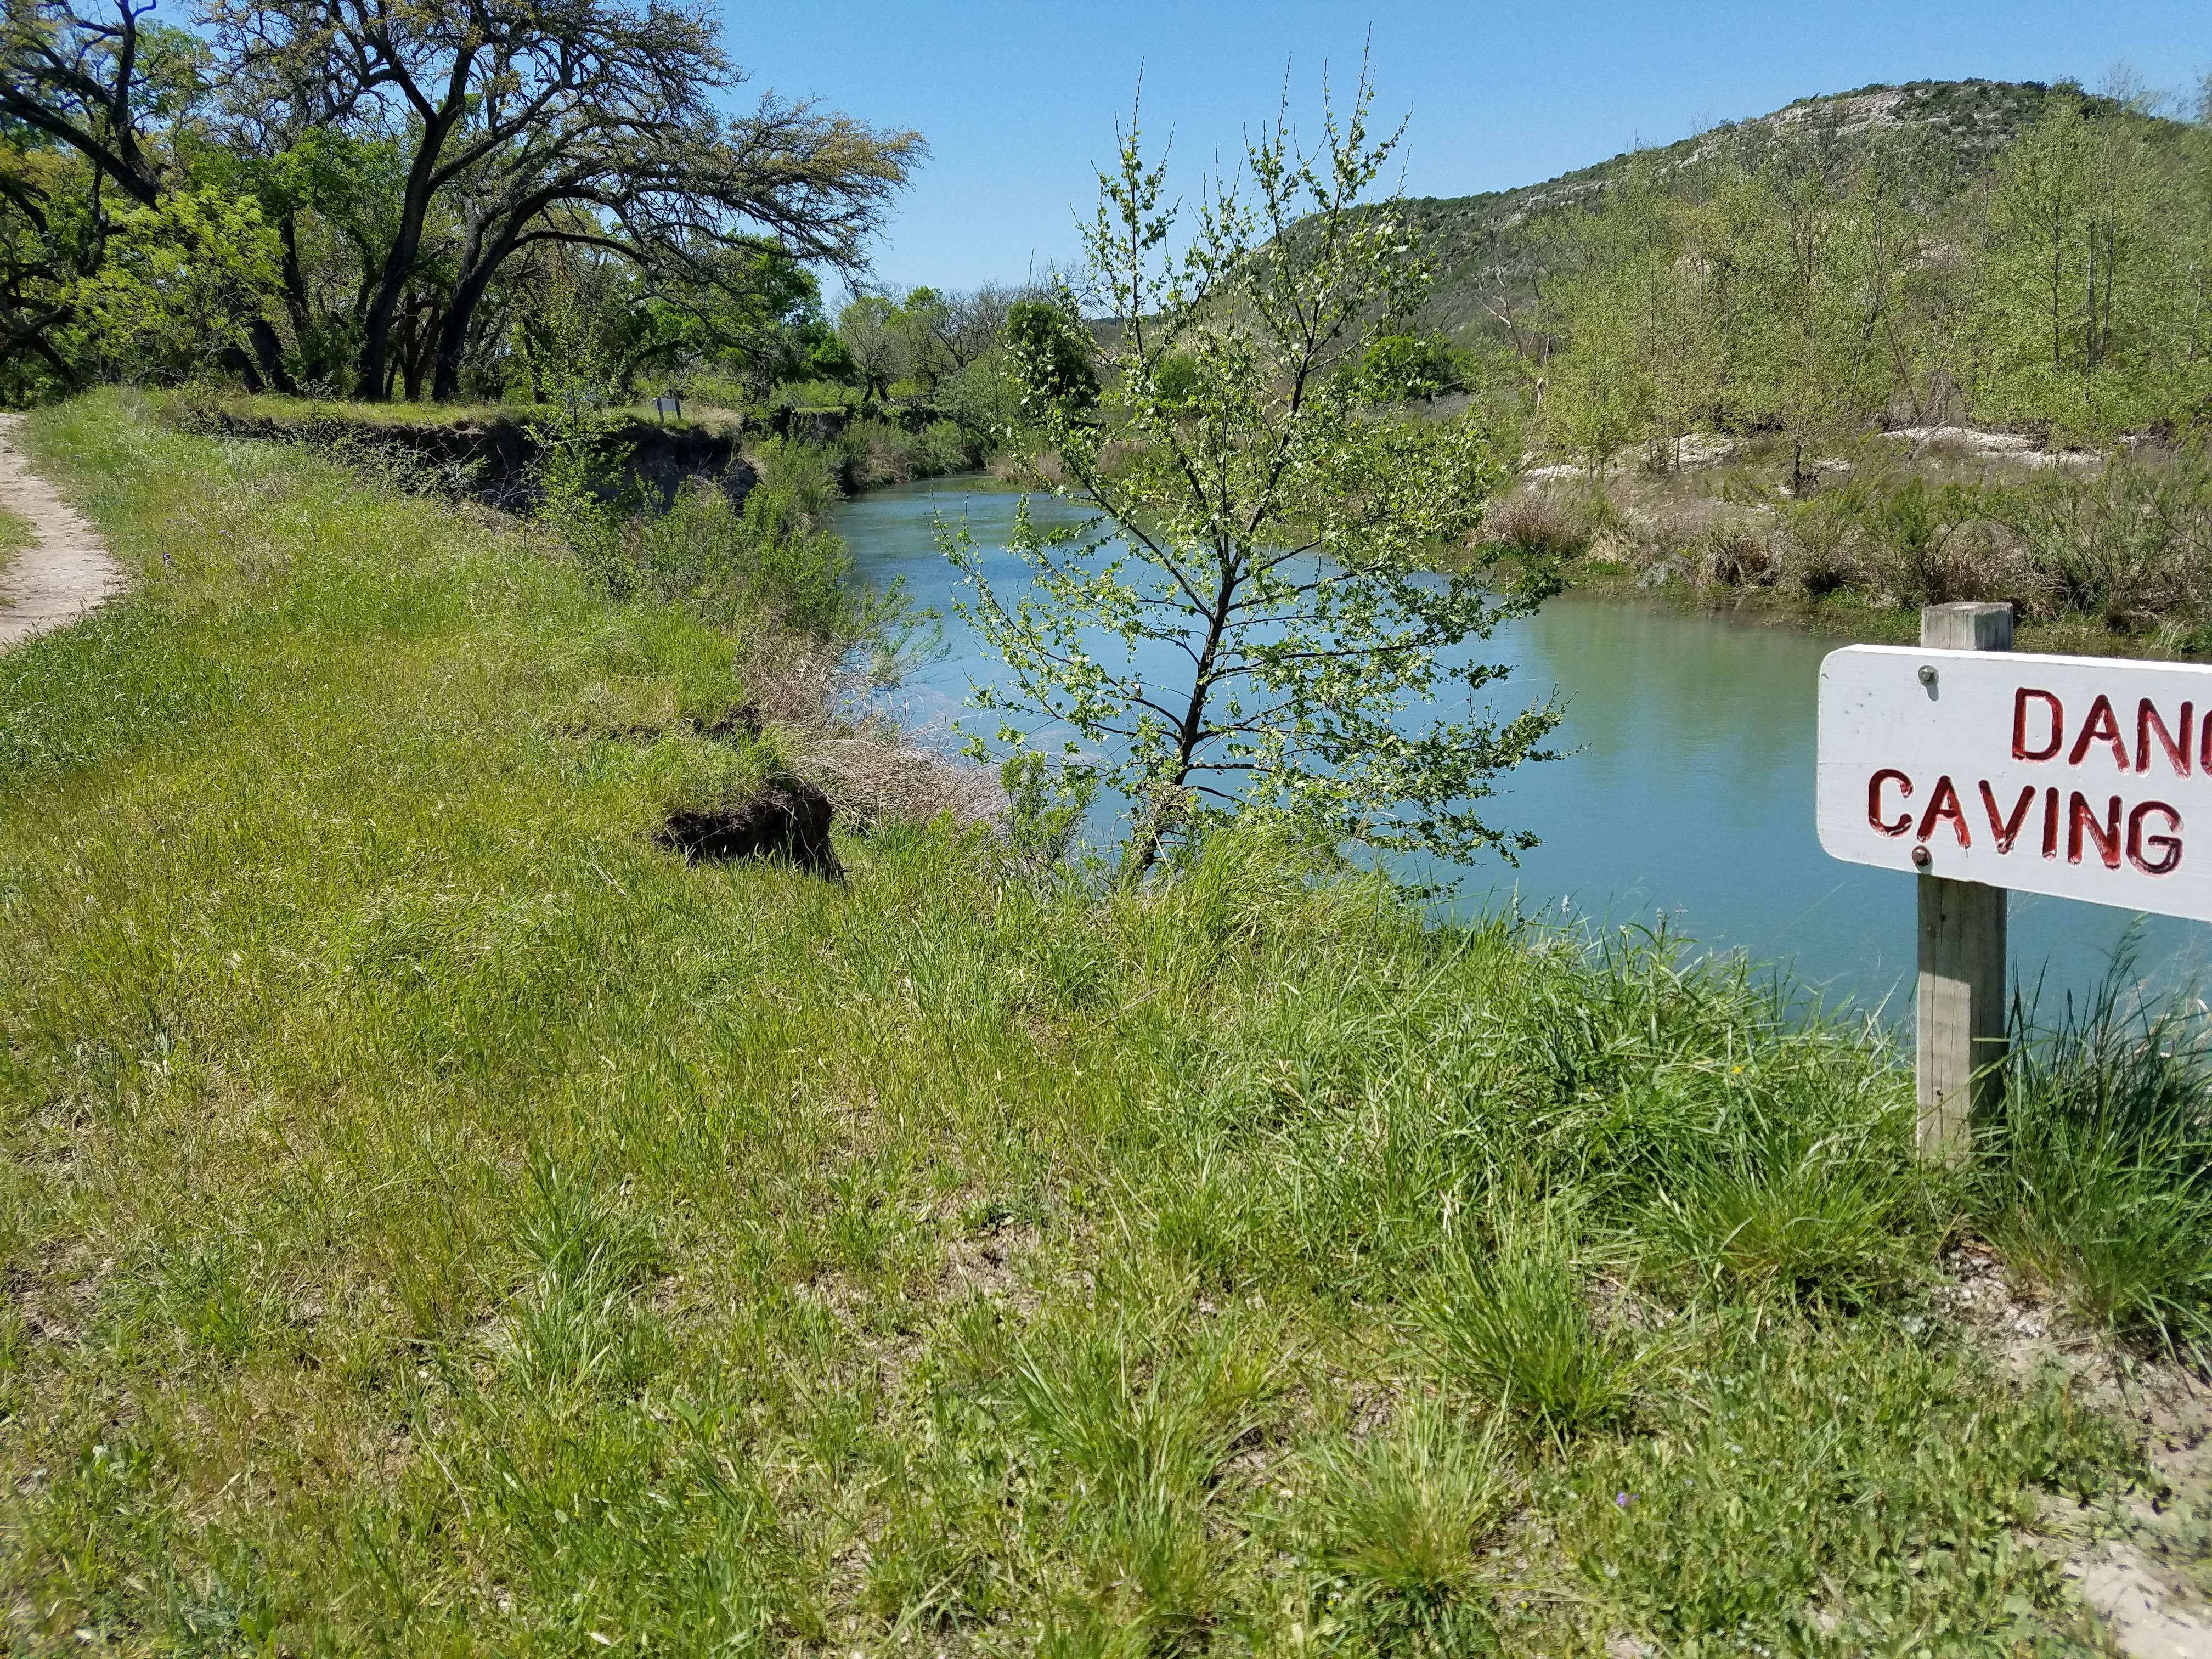 South Llano River State Park 